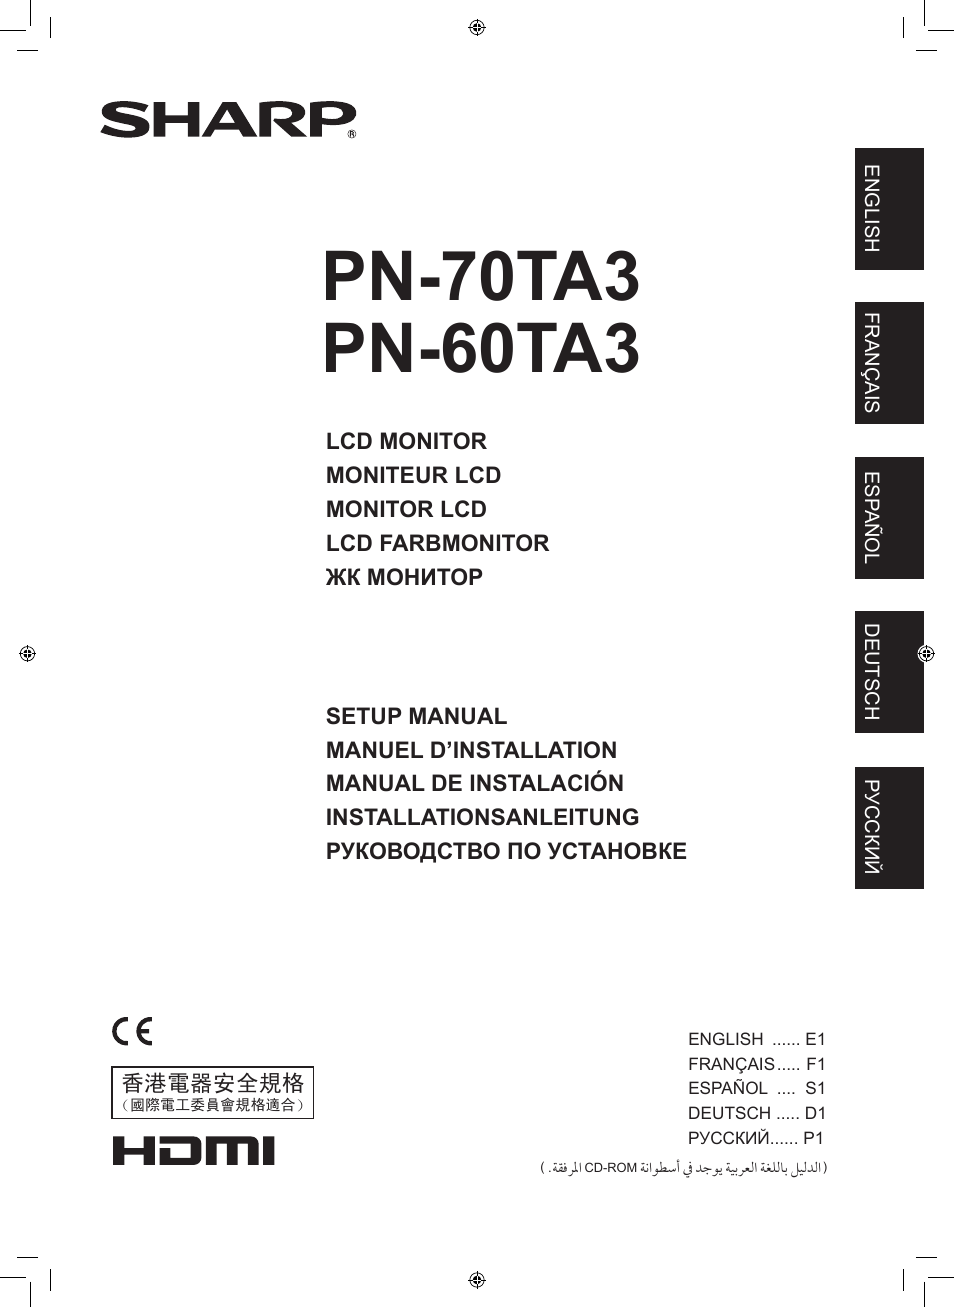 Sharp PN-60TA3 User Manual | 56 pages